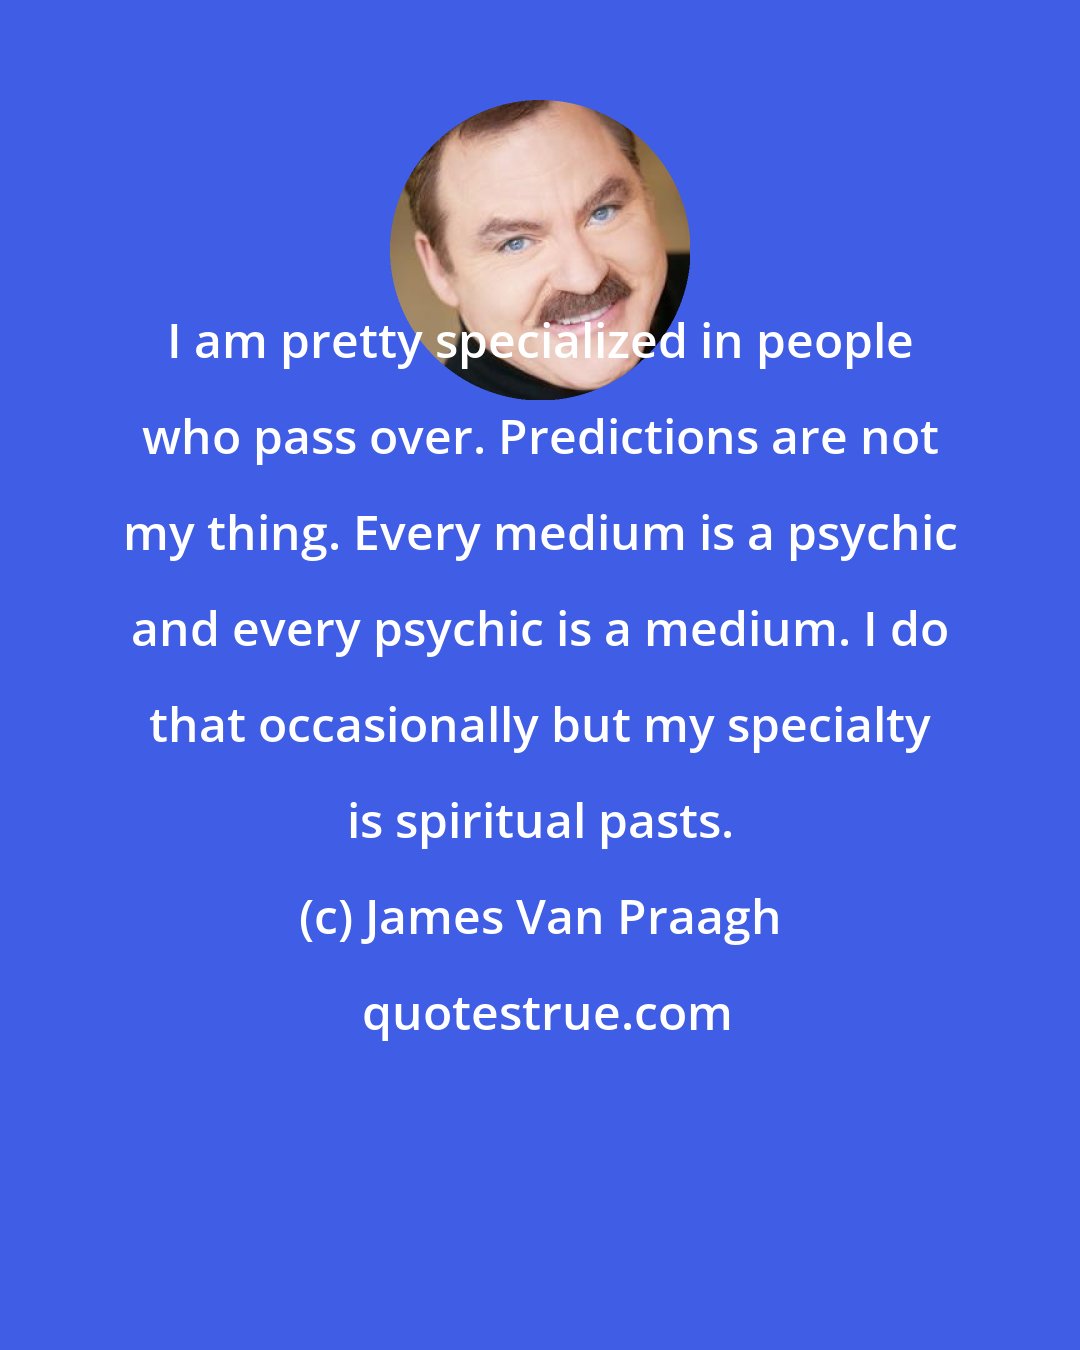 James Van Praagh: I am pretty specialized in people who pass over. Predictions are not my thing. Every medium is a psychic and every psychic is a medium. I do that occasionally but my specialty is spiritual pasts.